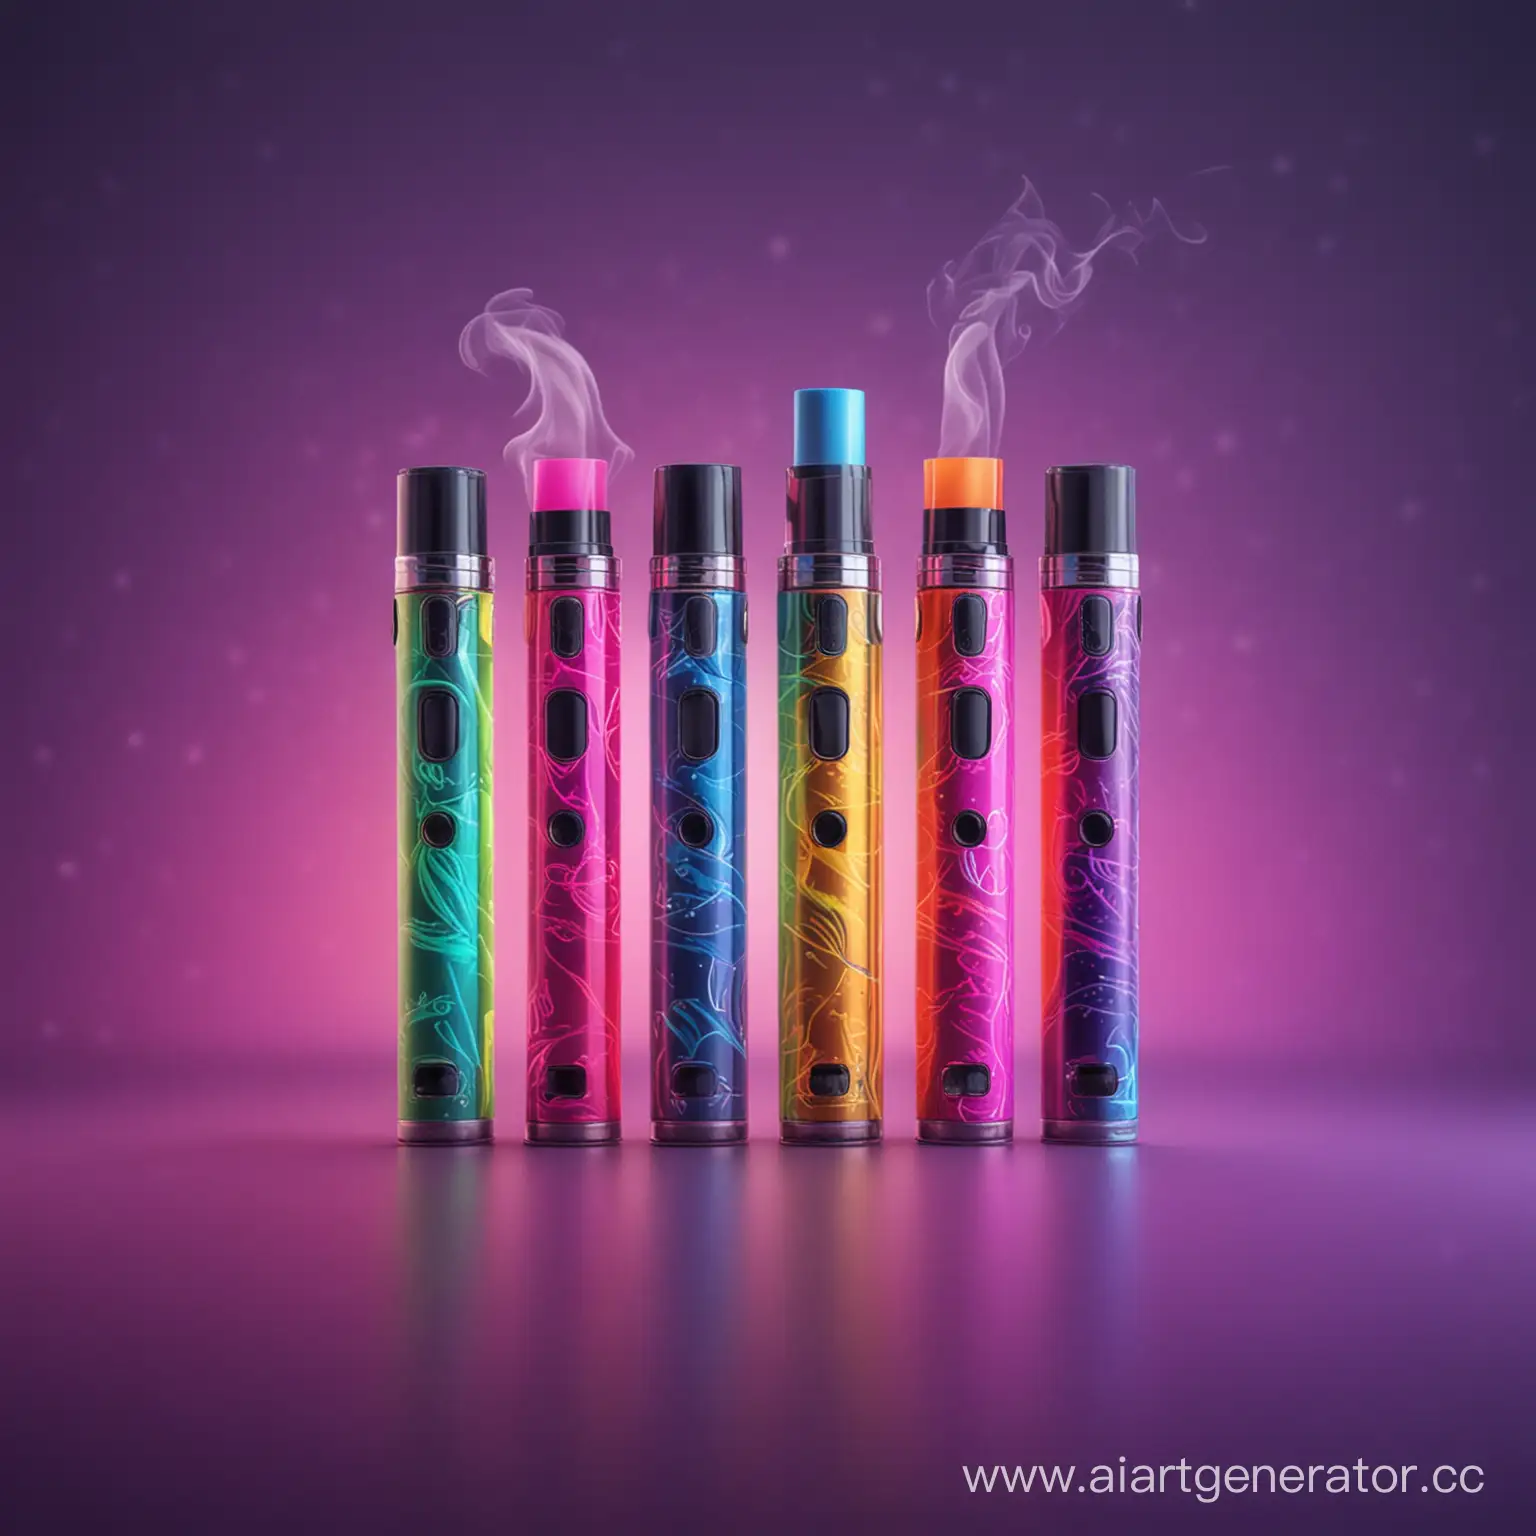 Colorful-Neon-Background-Showcasing-Flavored-Electronic-Cigarettes-Waka-Advertisement